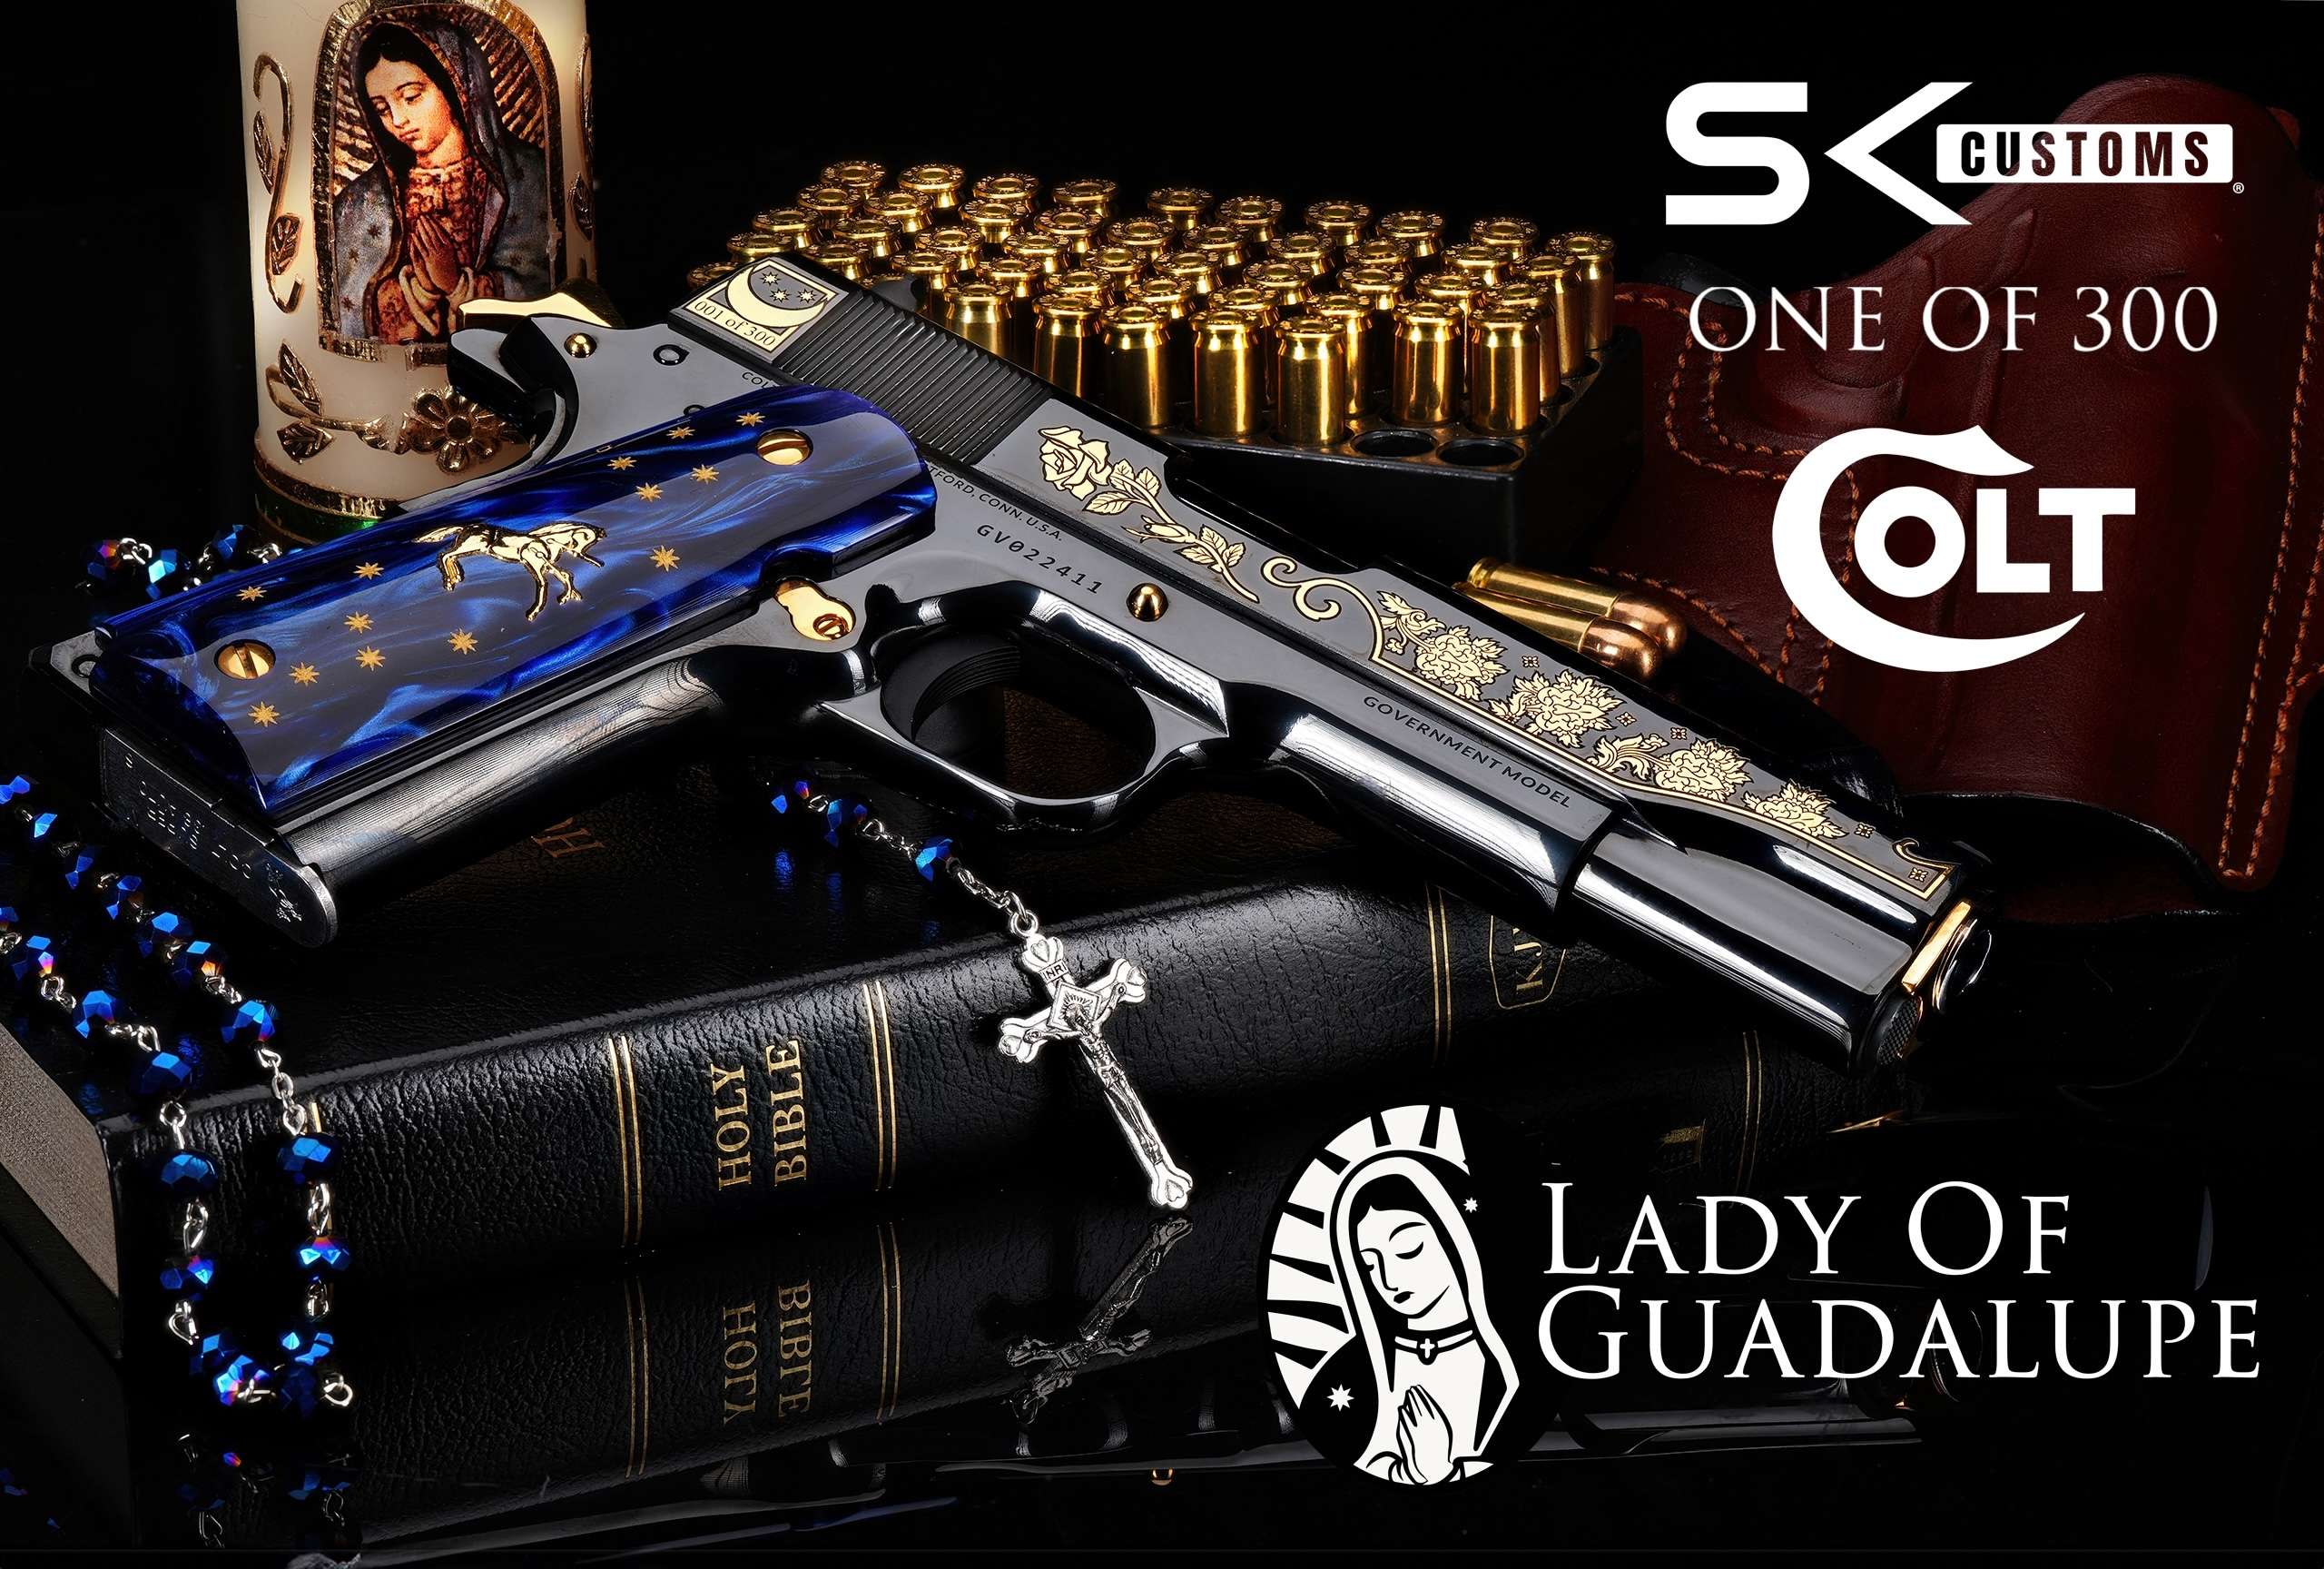 SK CUSTOMS COLT 1911 38 Super LADY OF GUADALUPE LIMITED EDITION #002 OF 300-img-0